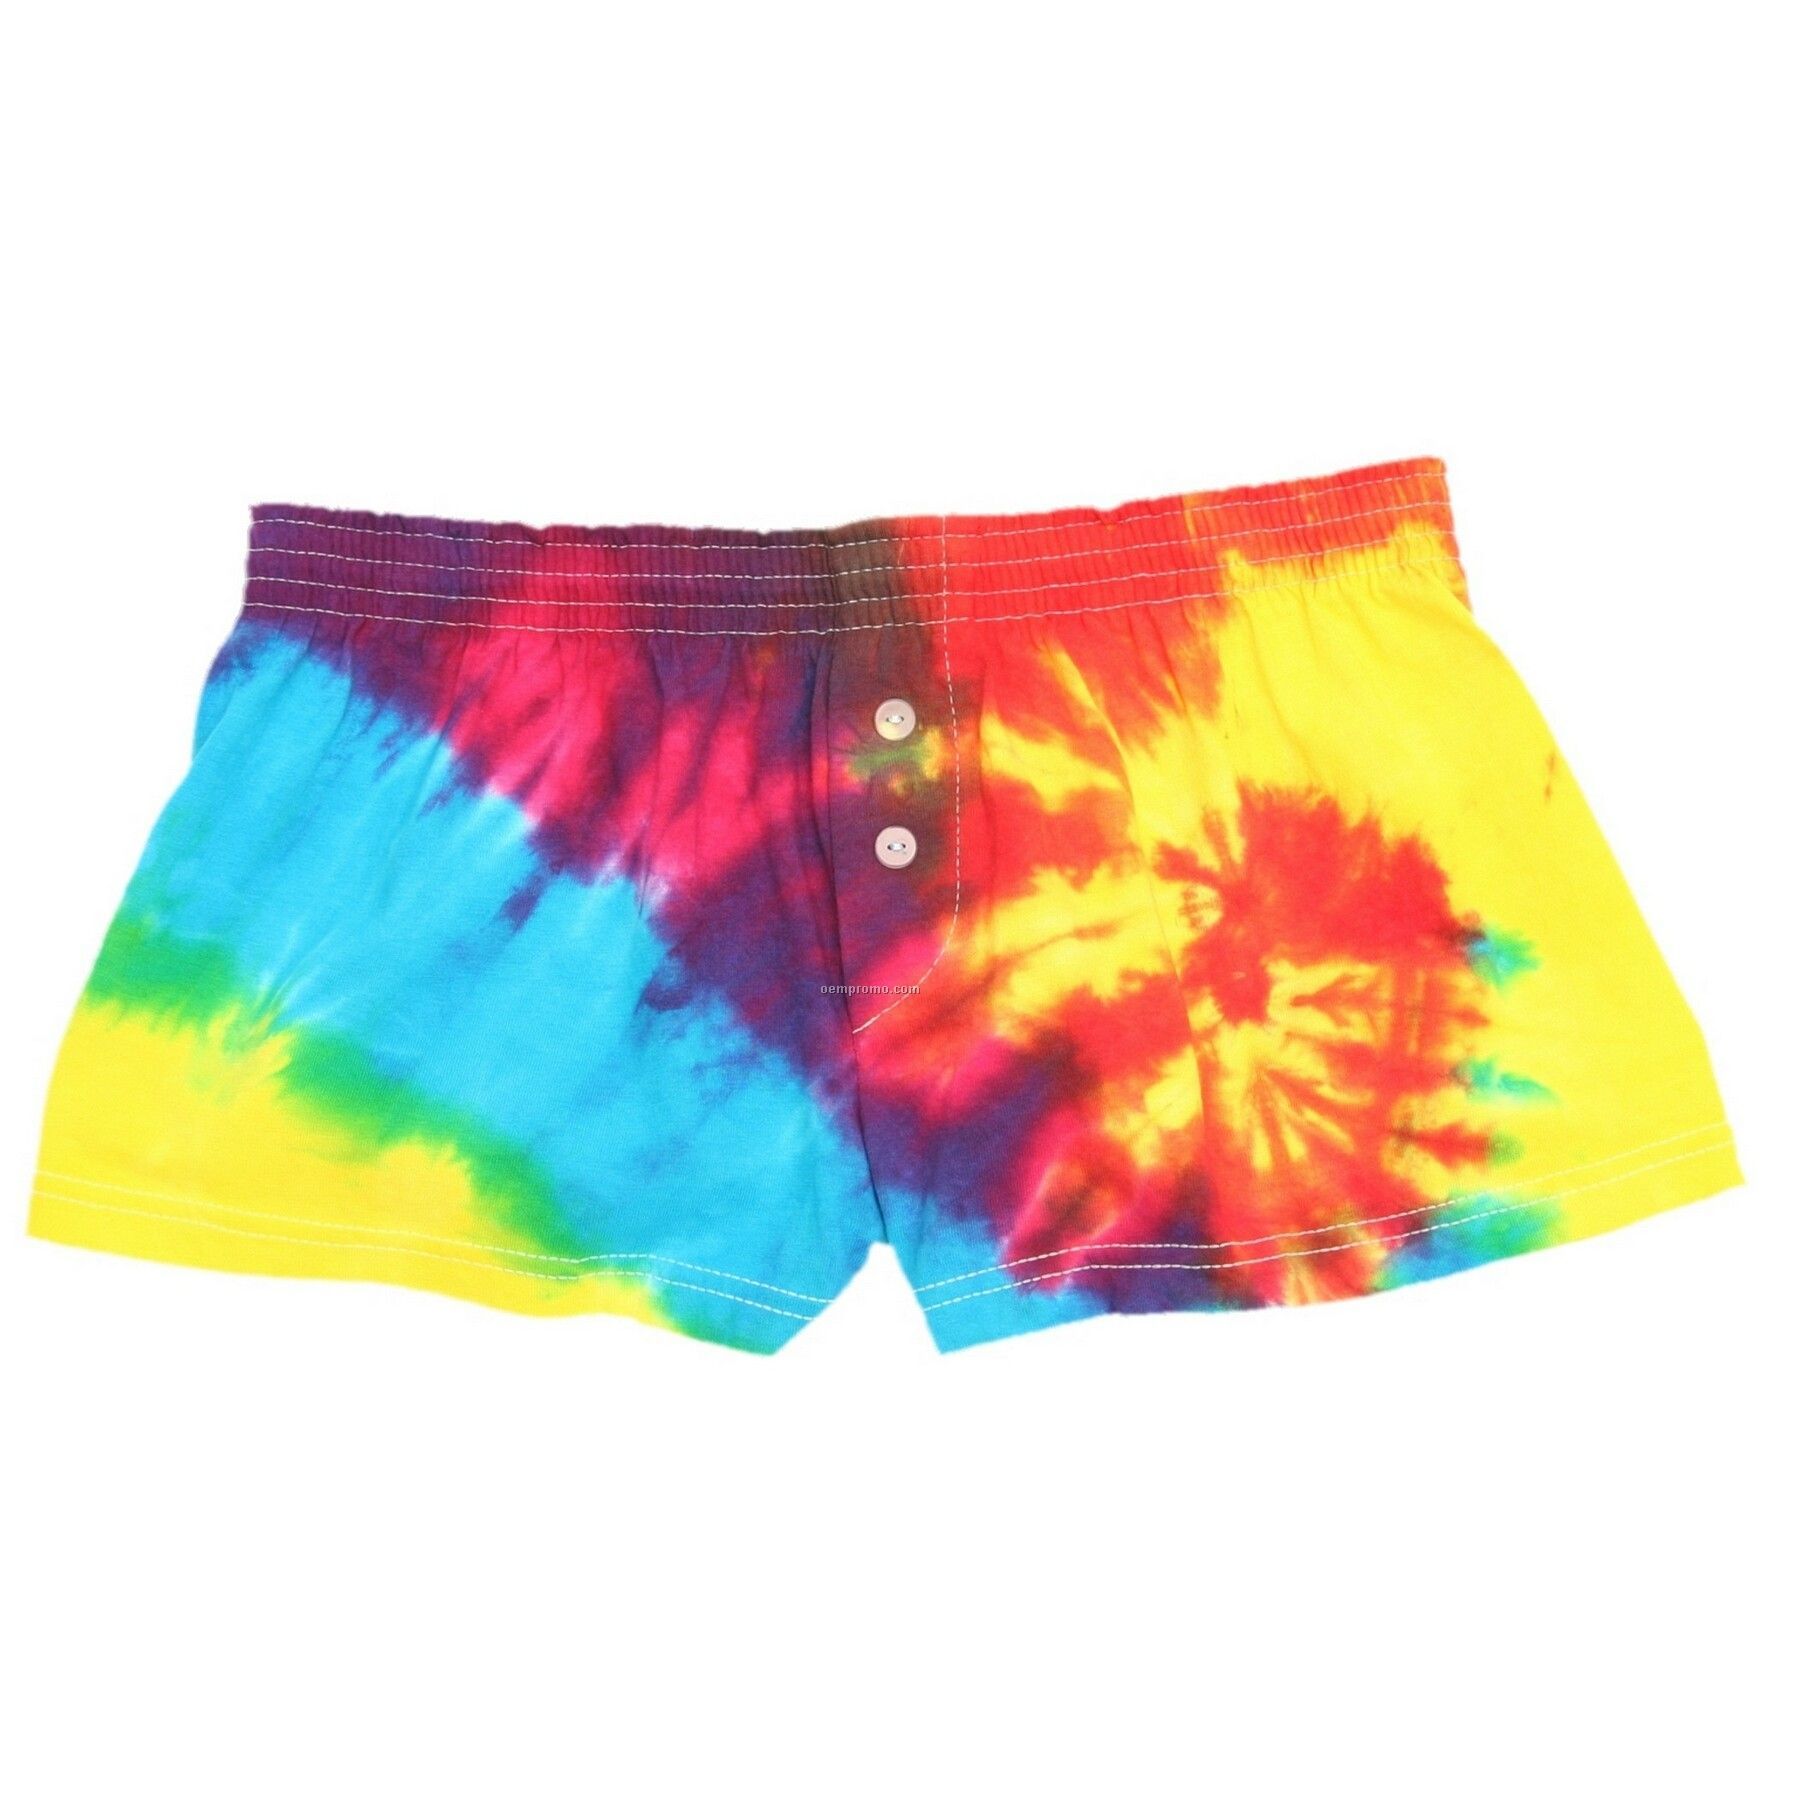 Ladies' Rainbow Tie Dye Jersey Bitty Boxer Shorts With False Fly